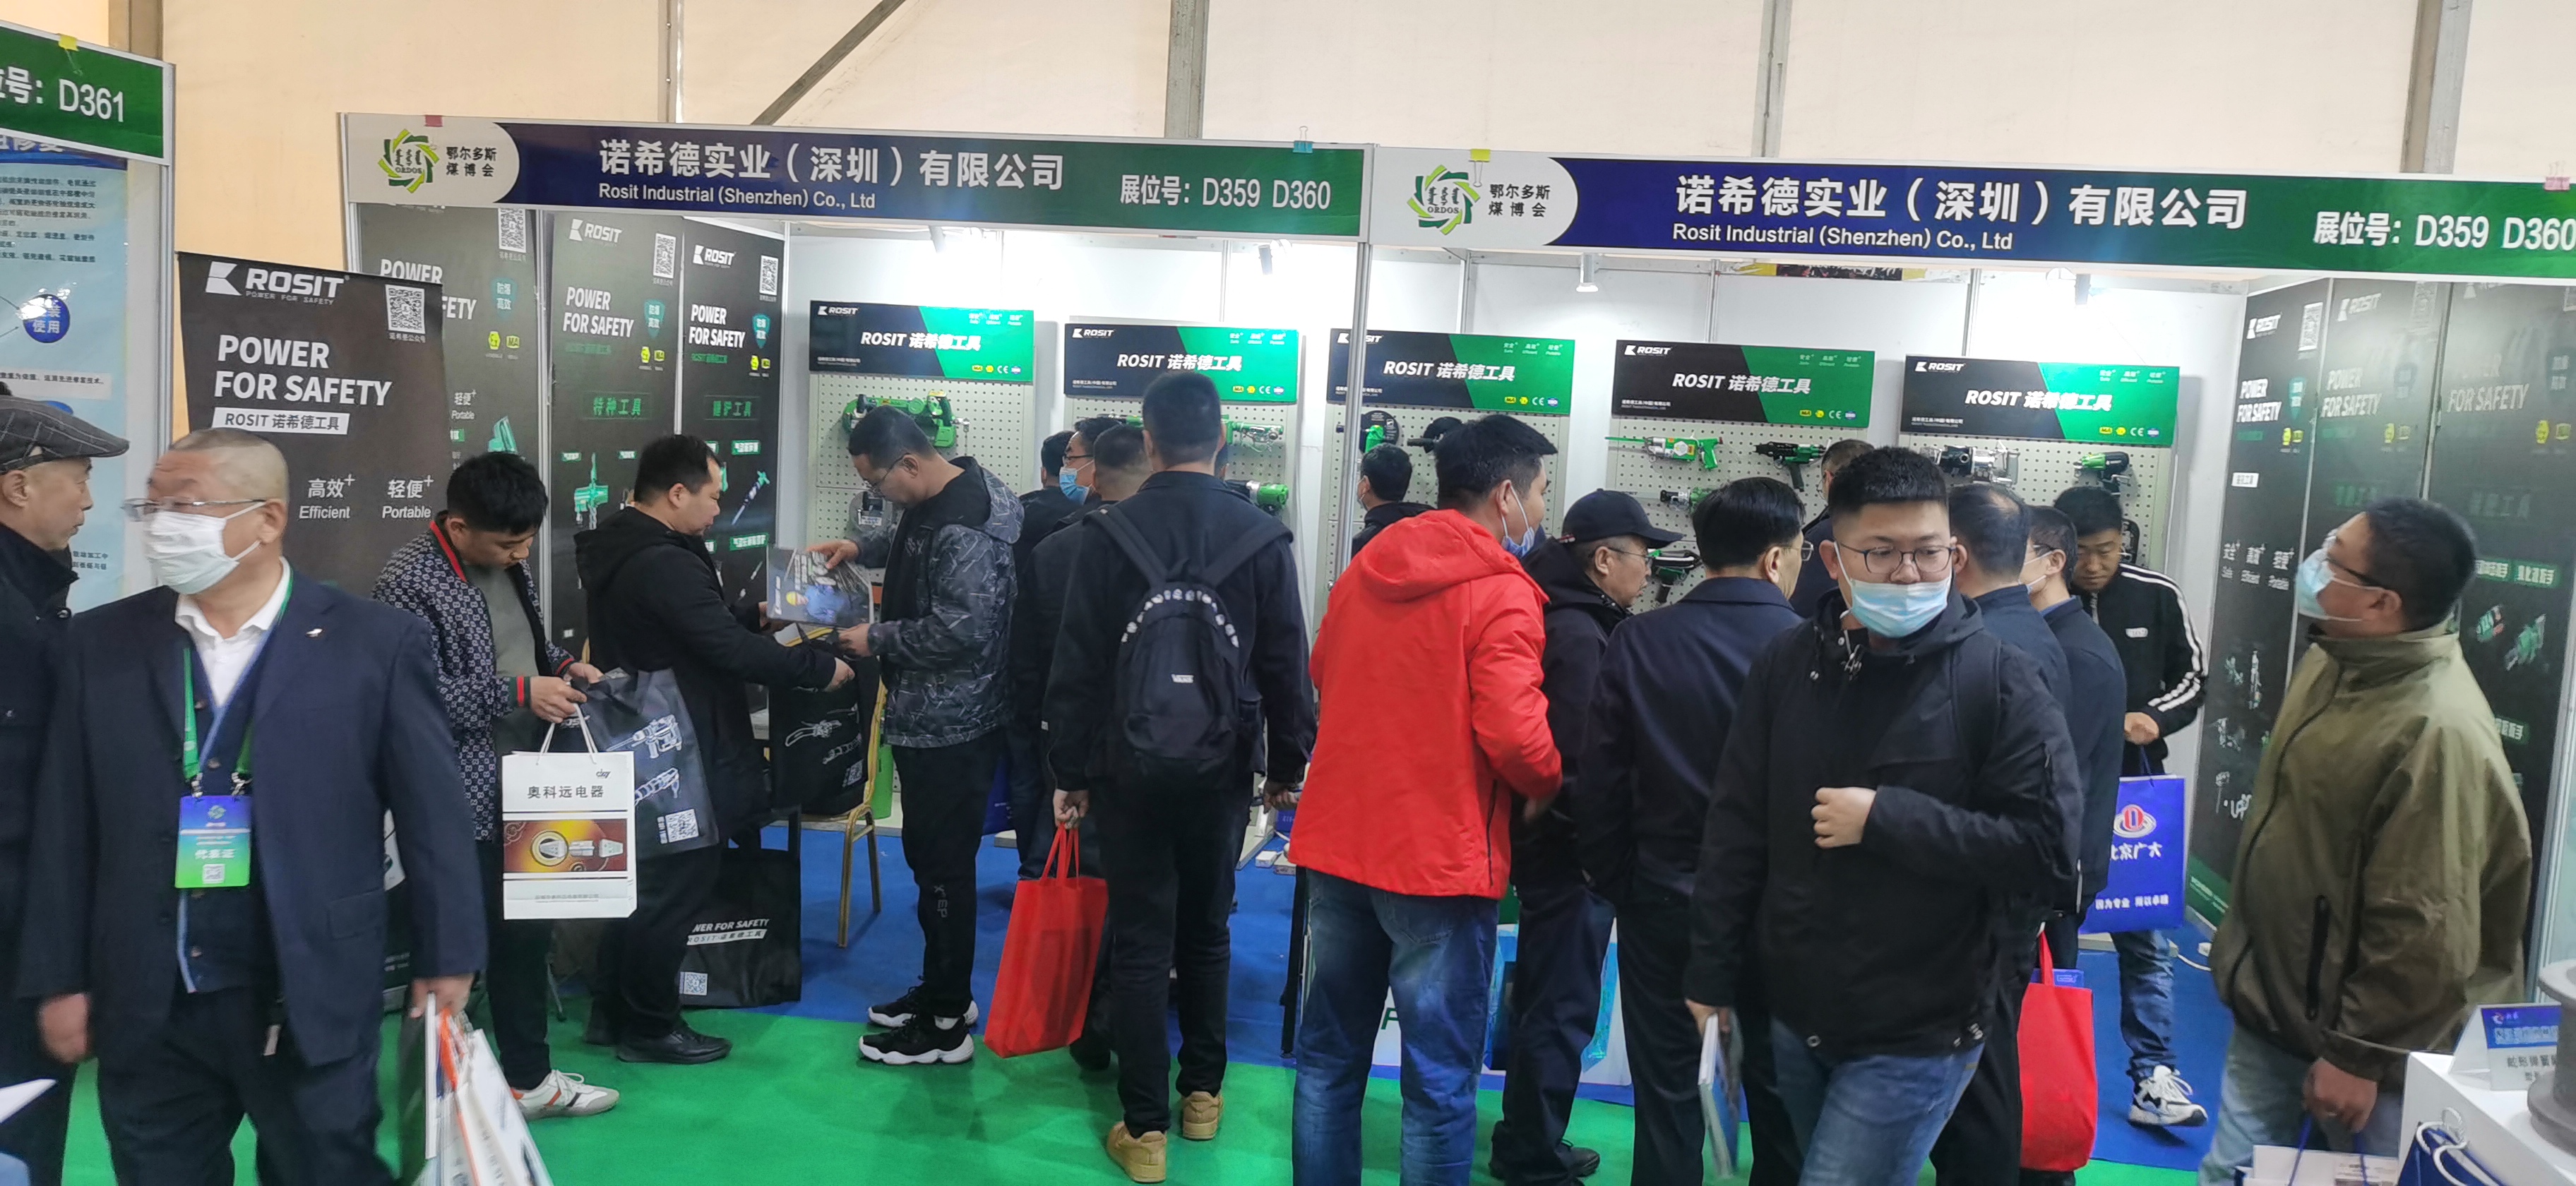 16th Ordors International Coal & Energy Industrial Exihition(图8)